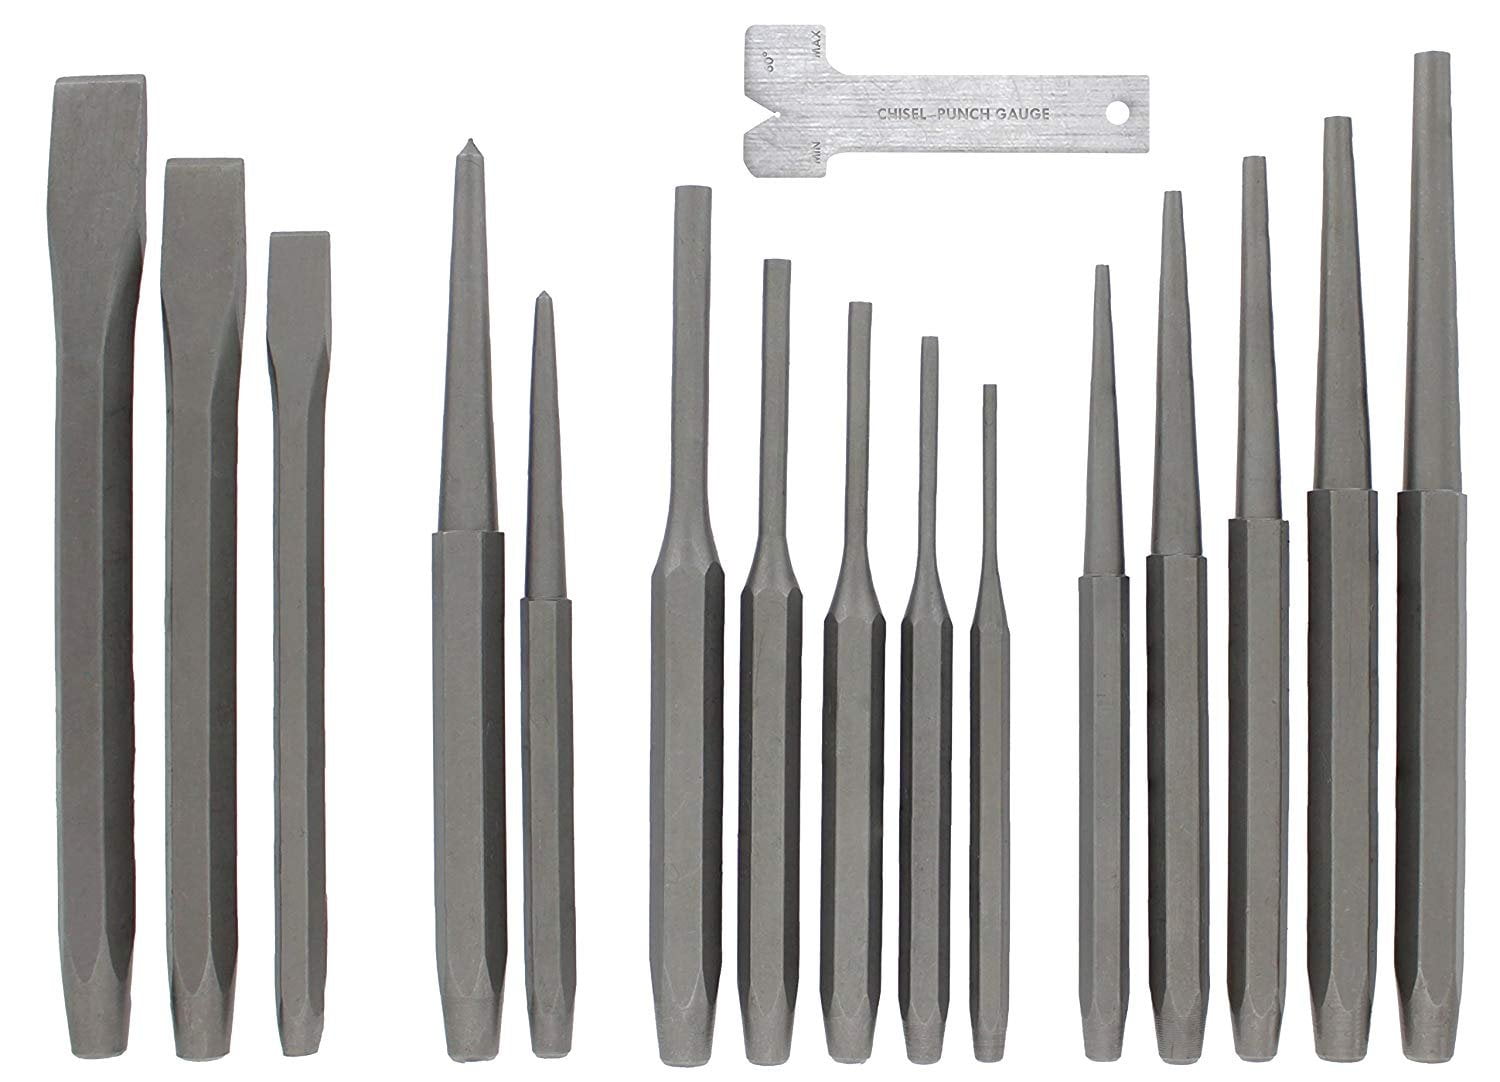 Details about  / 16pc Mechanics Punch and Chisel Set Industrial Pin Tapered Center Chisel Punch